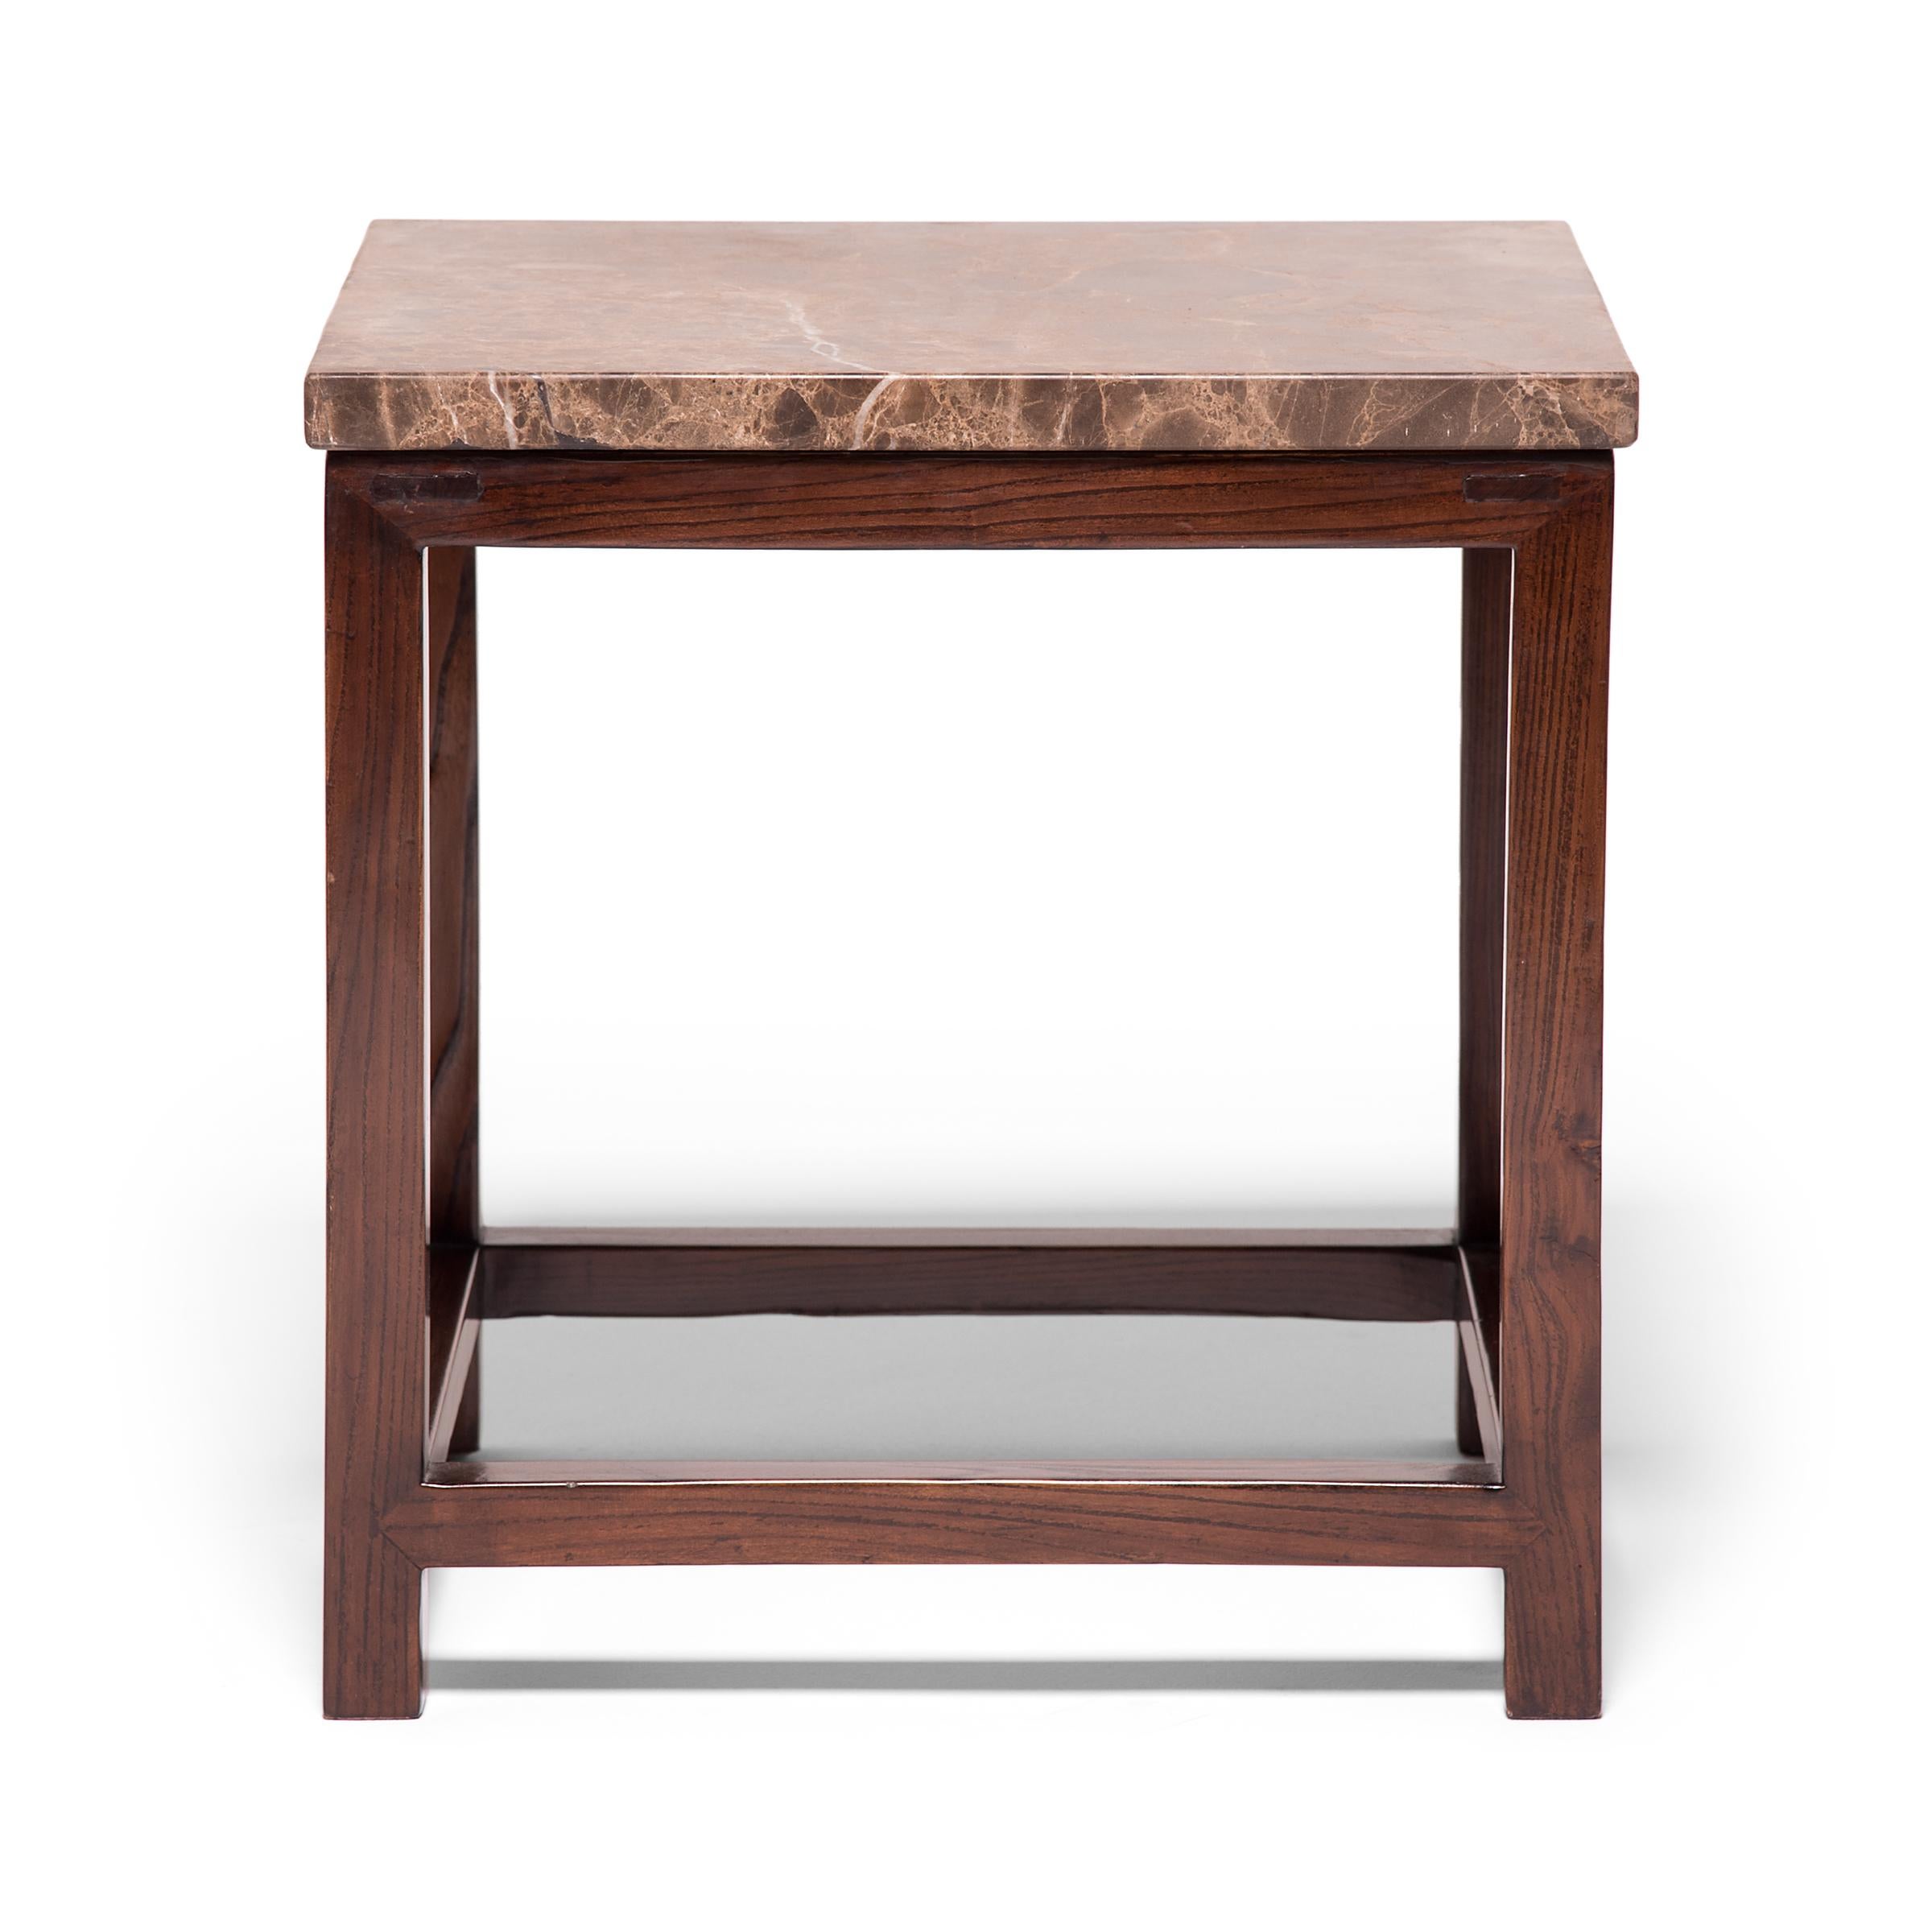 marble top square table